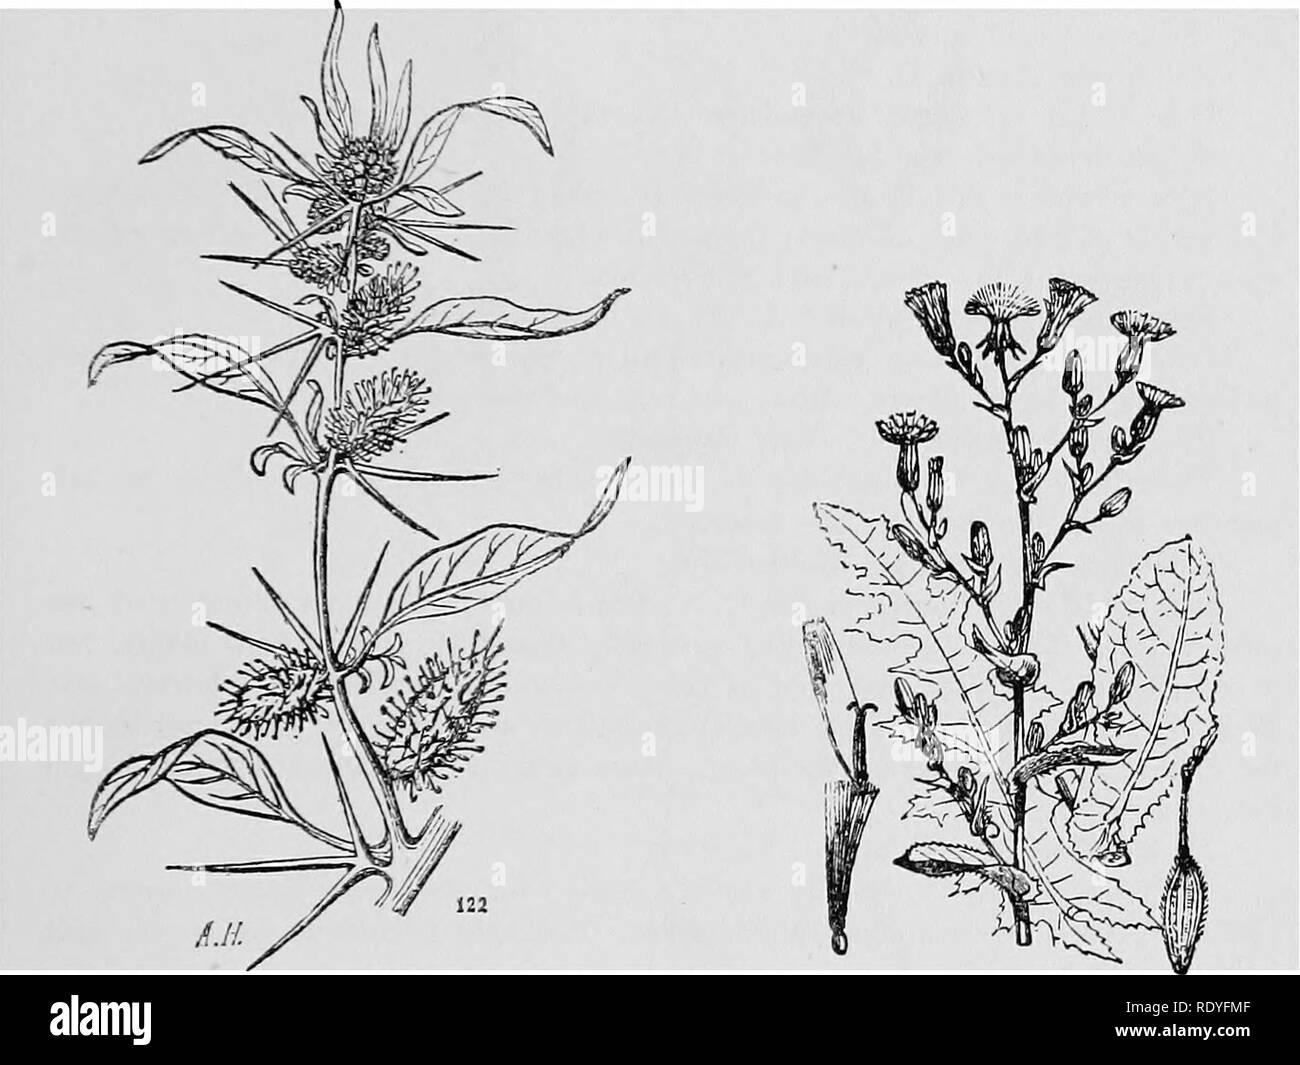 . A manual of poisonous plants, chiefly of eastern North America, with brief notes on economic and medicinal plants, and numerous illustrations. Poisonous plants. IMPORTANT POISONOUS PLANTS 137 Composiiae. Composite Family. Lactuca Scariola L. Prickly Lettuce. Common across the continent, also the var. Integra. Said to be poisonous. Cichorium Intybus L. Chicory. It has become widely naturalized in the north and west. When fed in large quantities to dairy cattle it imparts a bitter flavor to the milk and butter. It contains the bitter glucoside chicorin. Iva xanthiifolia Nutt. Marsh Elder. Half Stock Photo